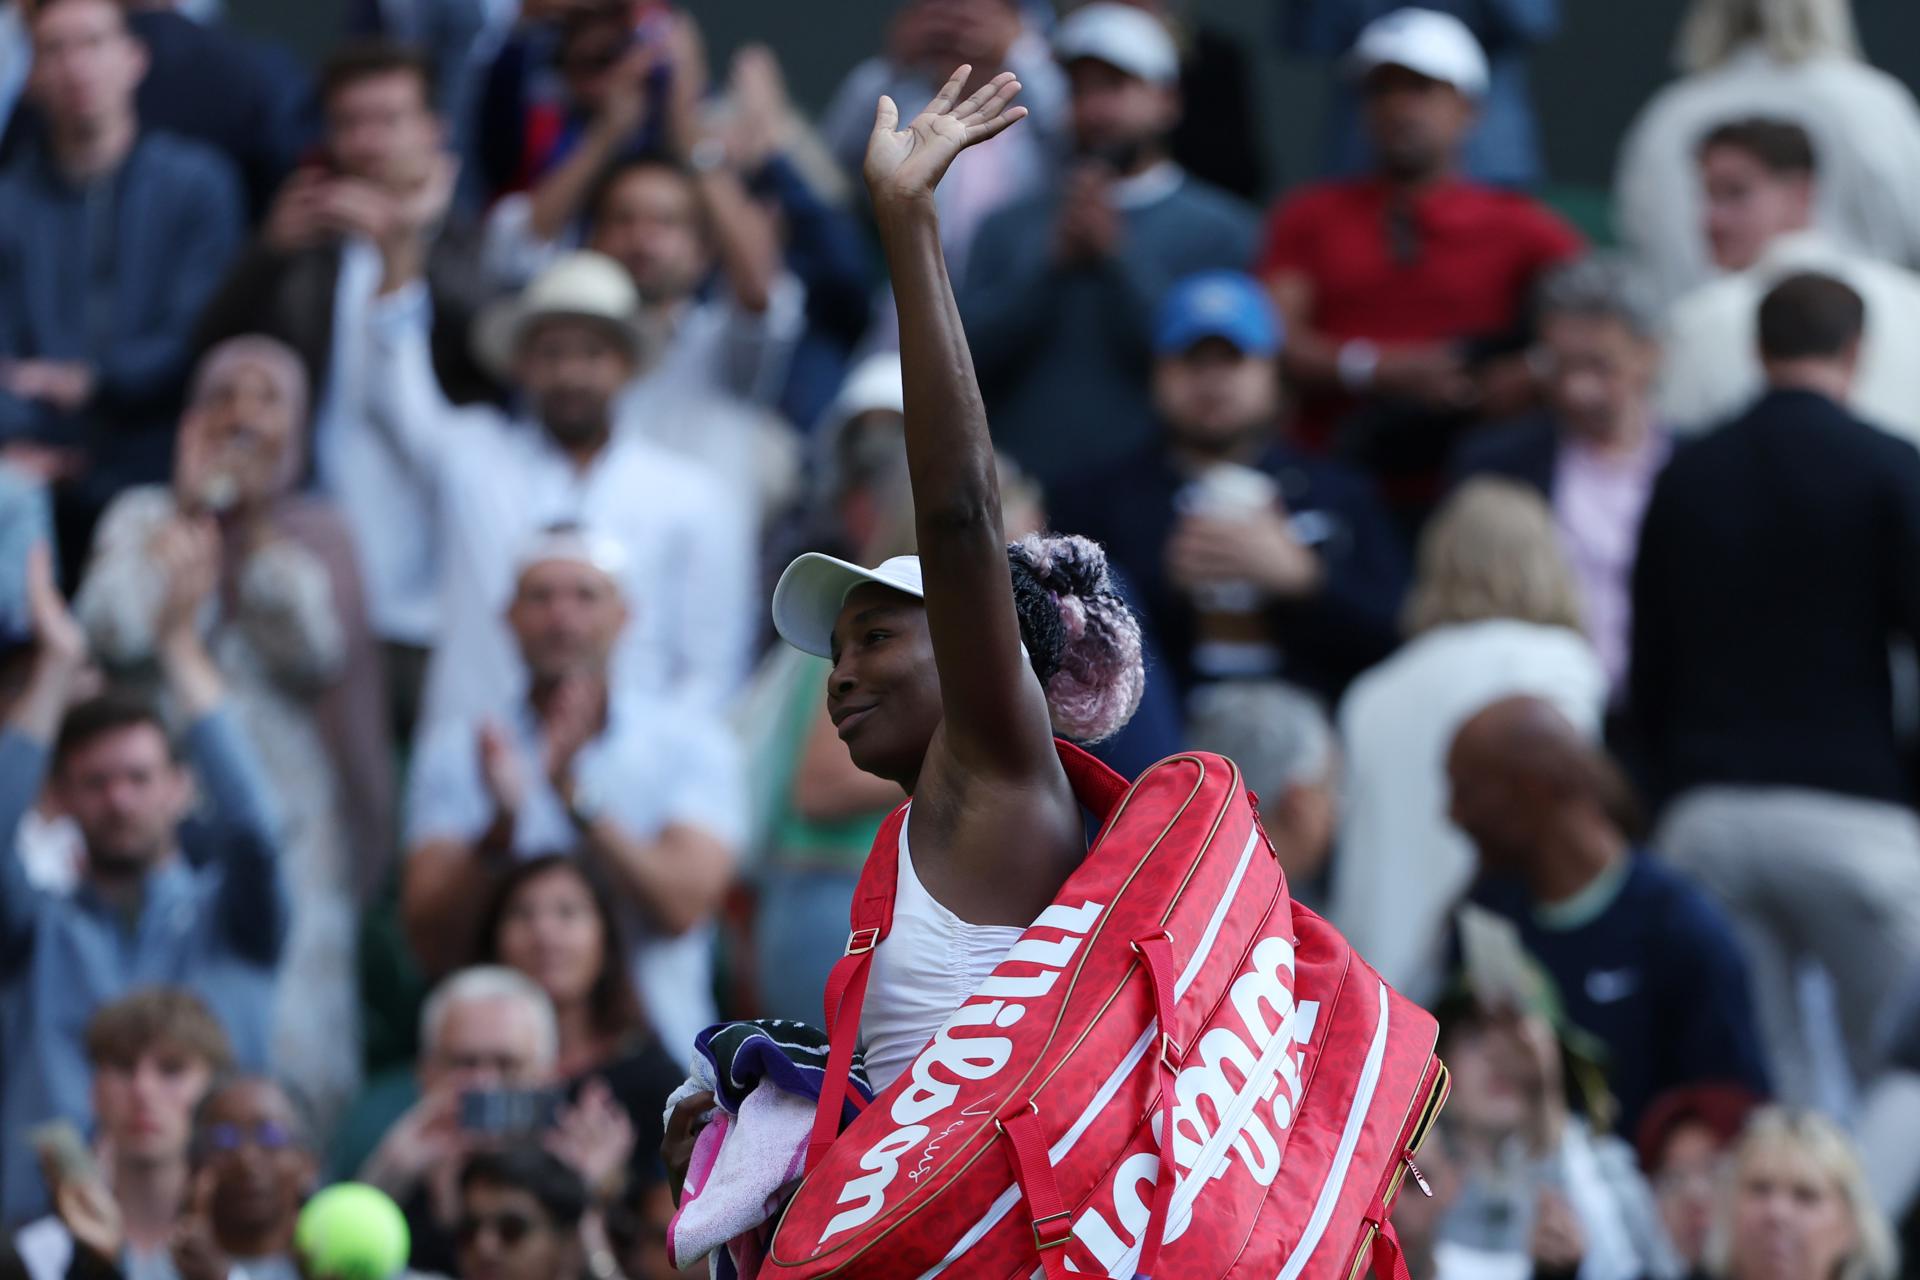 Venus Williams of the USA acknowledges the crowd after losing to Elina Svitolina of Ukraine in first-round action at the Wimbledon Championships, Wimbledon, Britain, 3 July 2023. EFE/EPA/NEIL HALL/EDITORIAL USE ONLY
